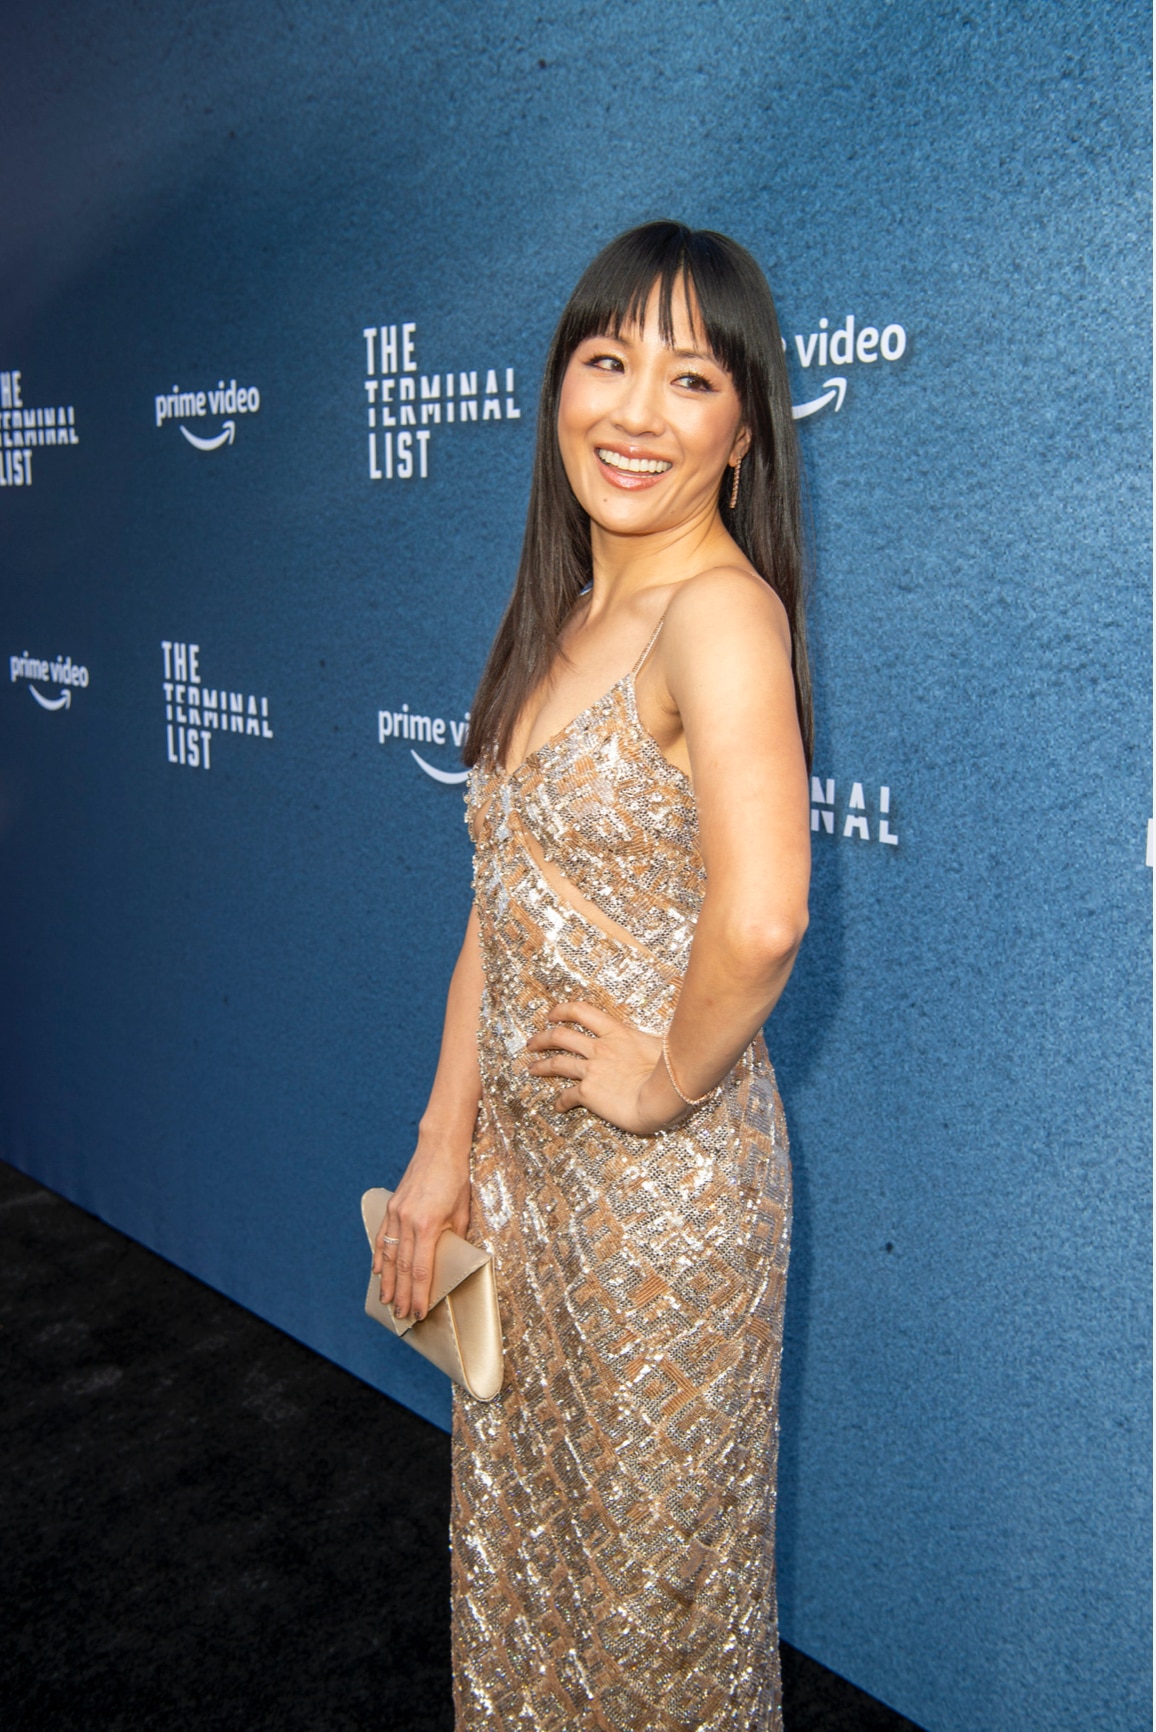 Constance Wu at 'The Terminal List' premiere. Courtesy: Prime Video